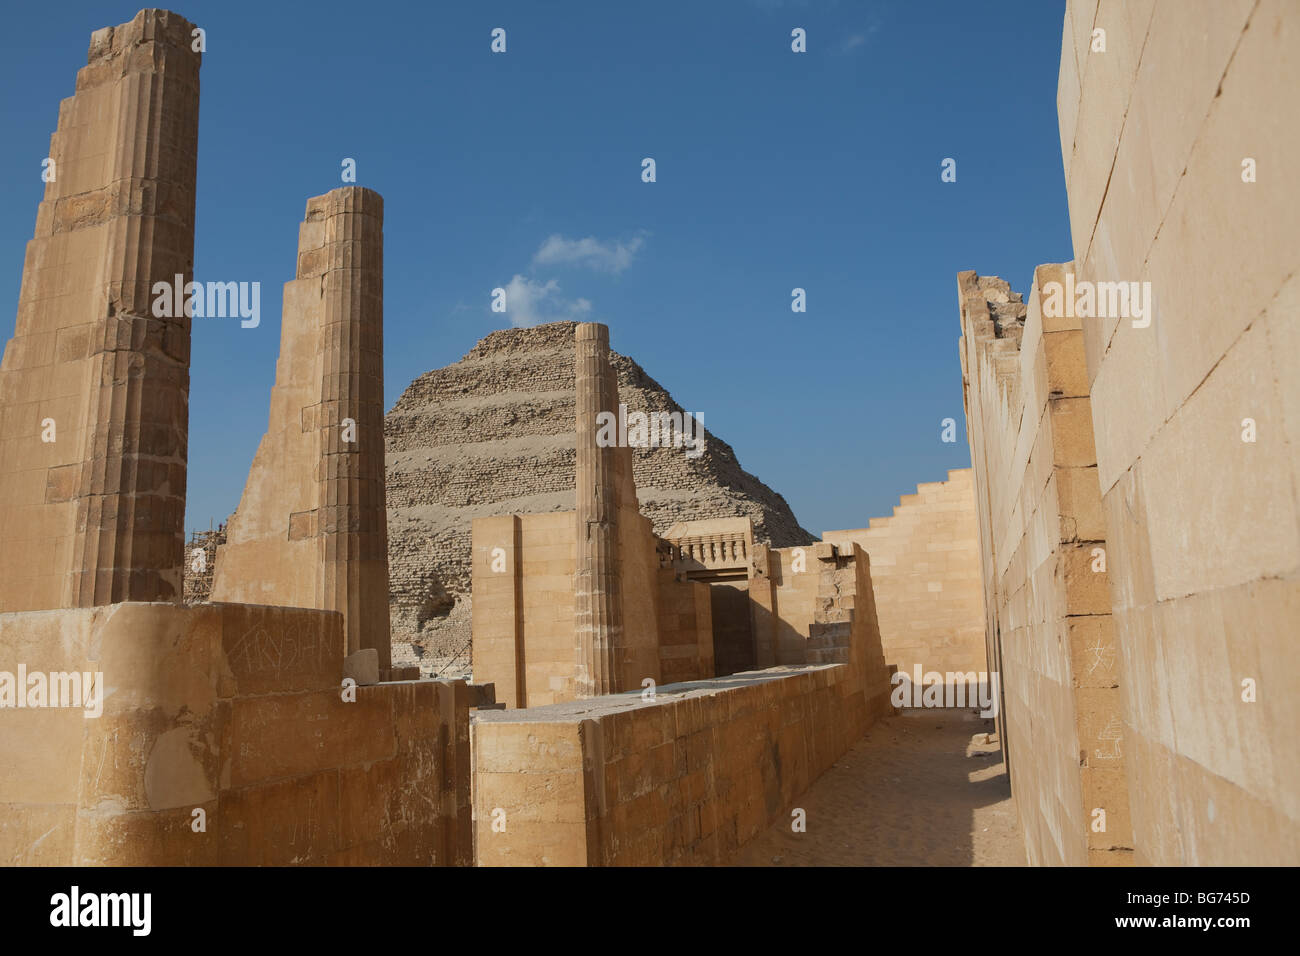 Step pyramid of Djoser (Zoser) in Saqqara, Egypt as seen from the Heb-Sed Jubilee Court. Stock Photo